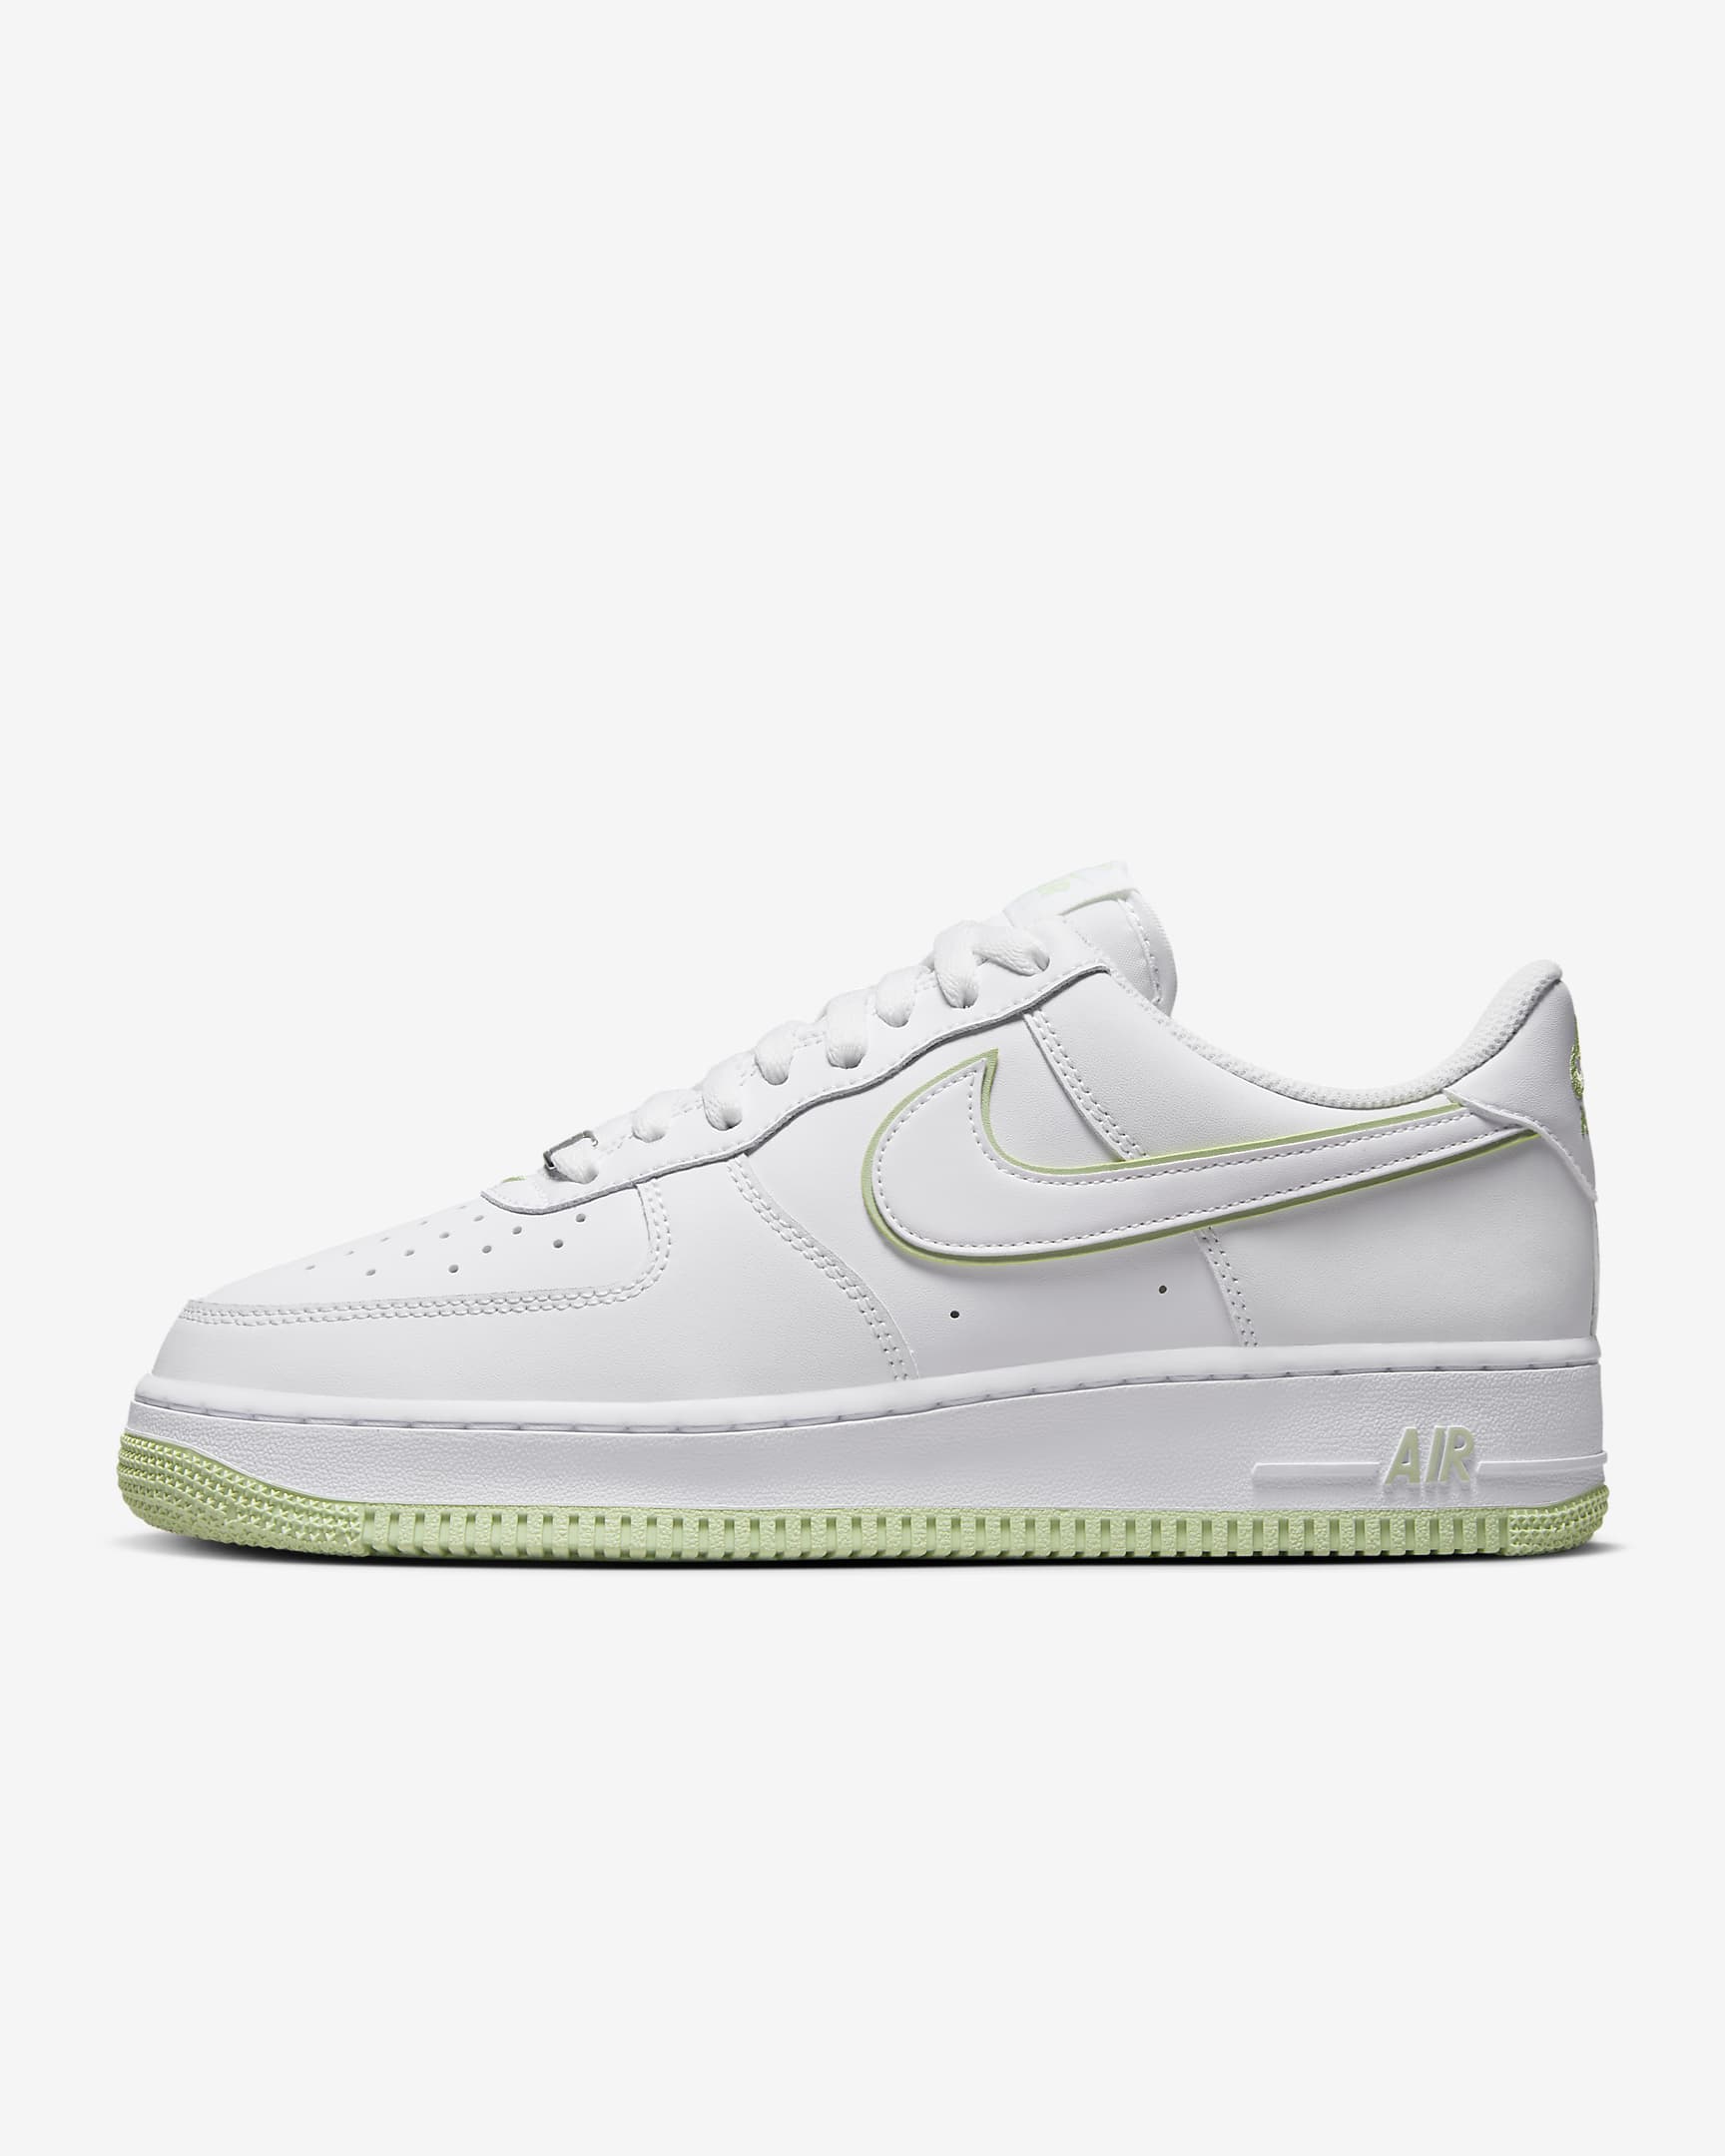 Nike Men's Air Force 1 07' Shoes (White/Honeydew) $65.23 & More + Free Shipping